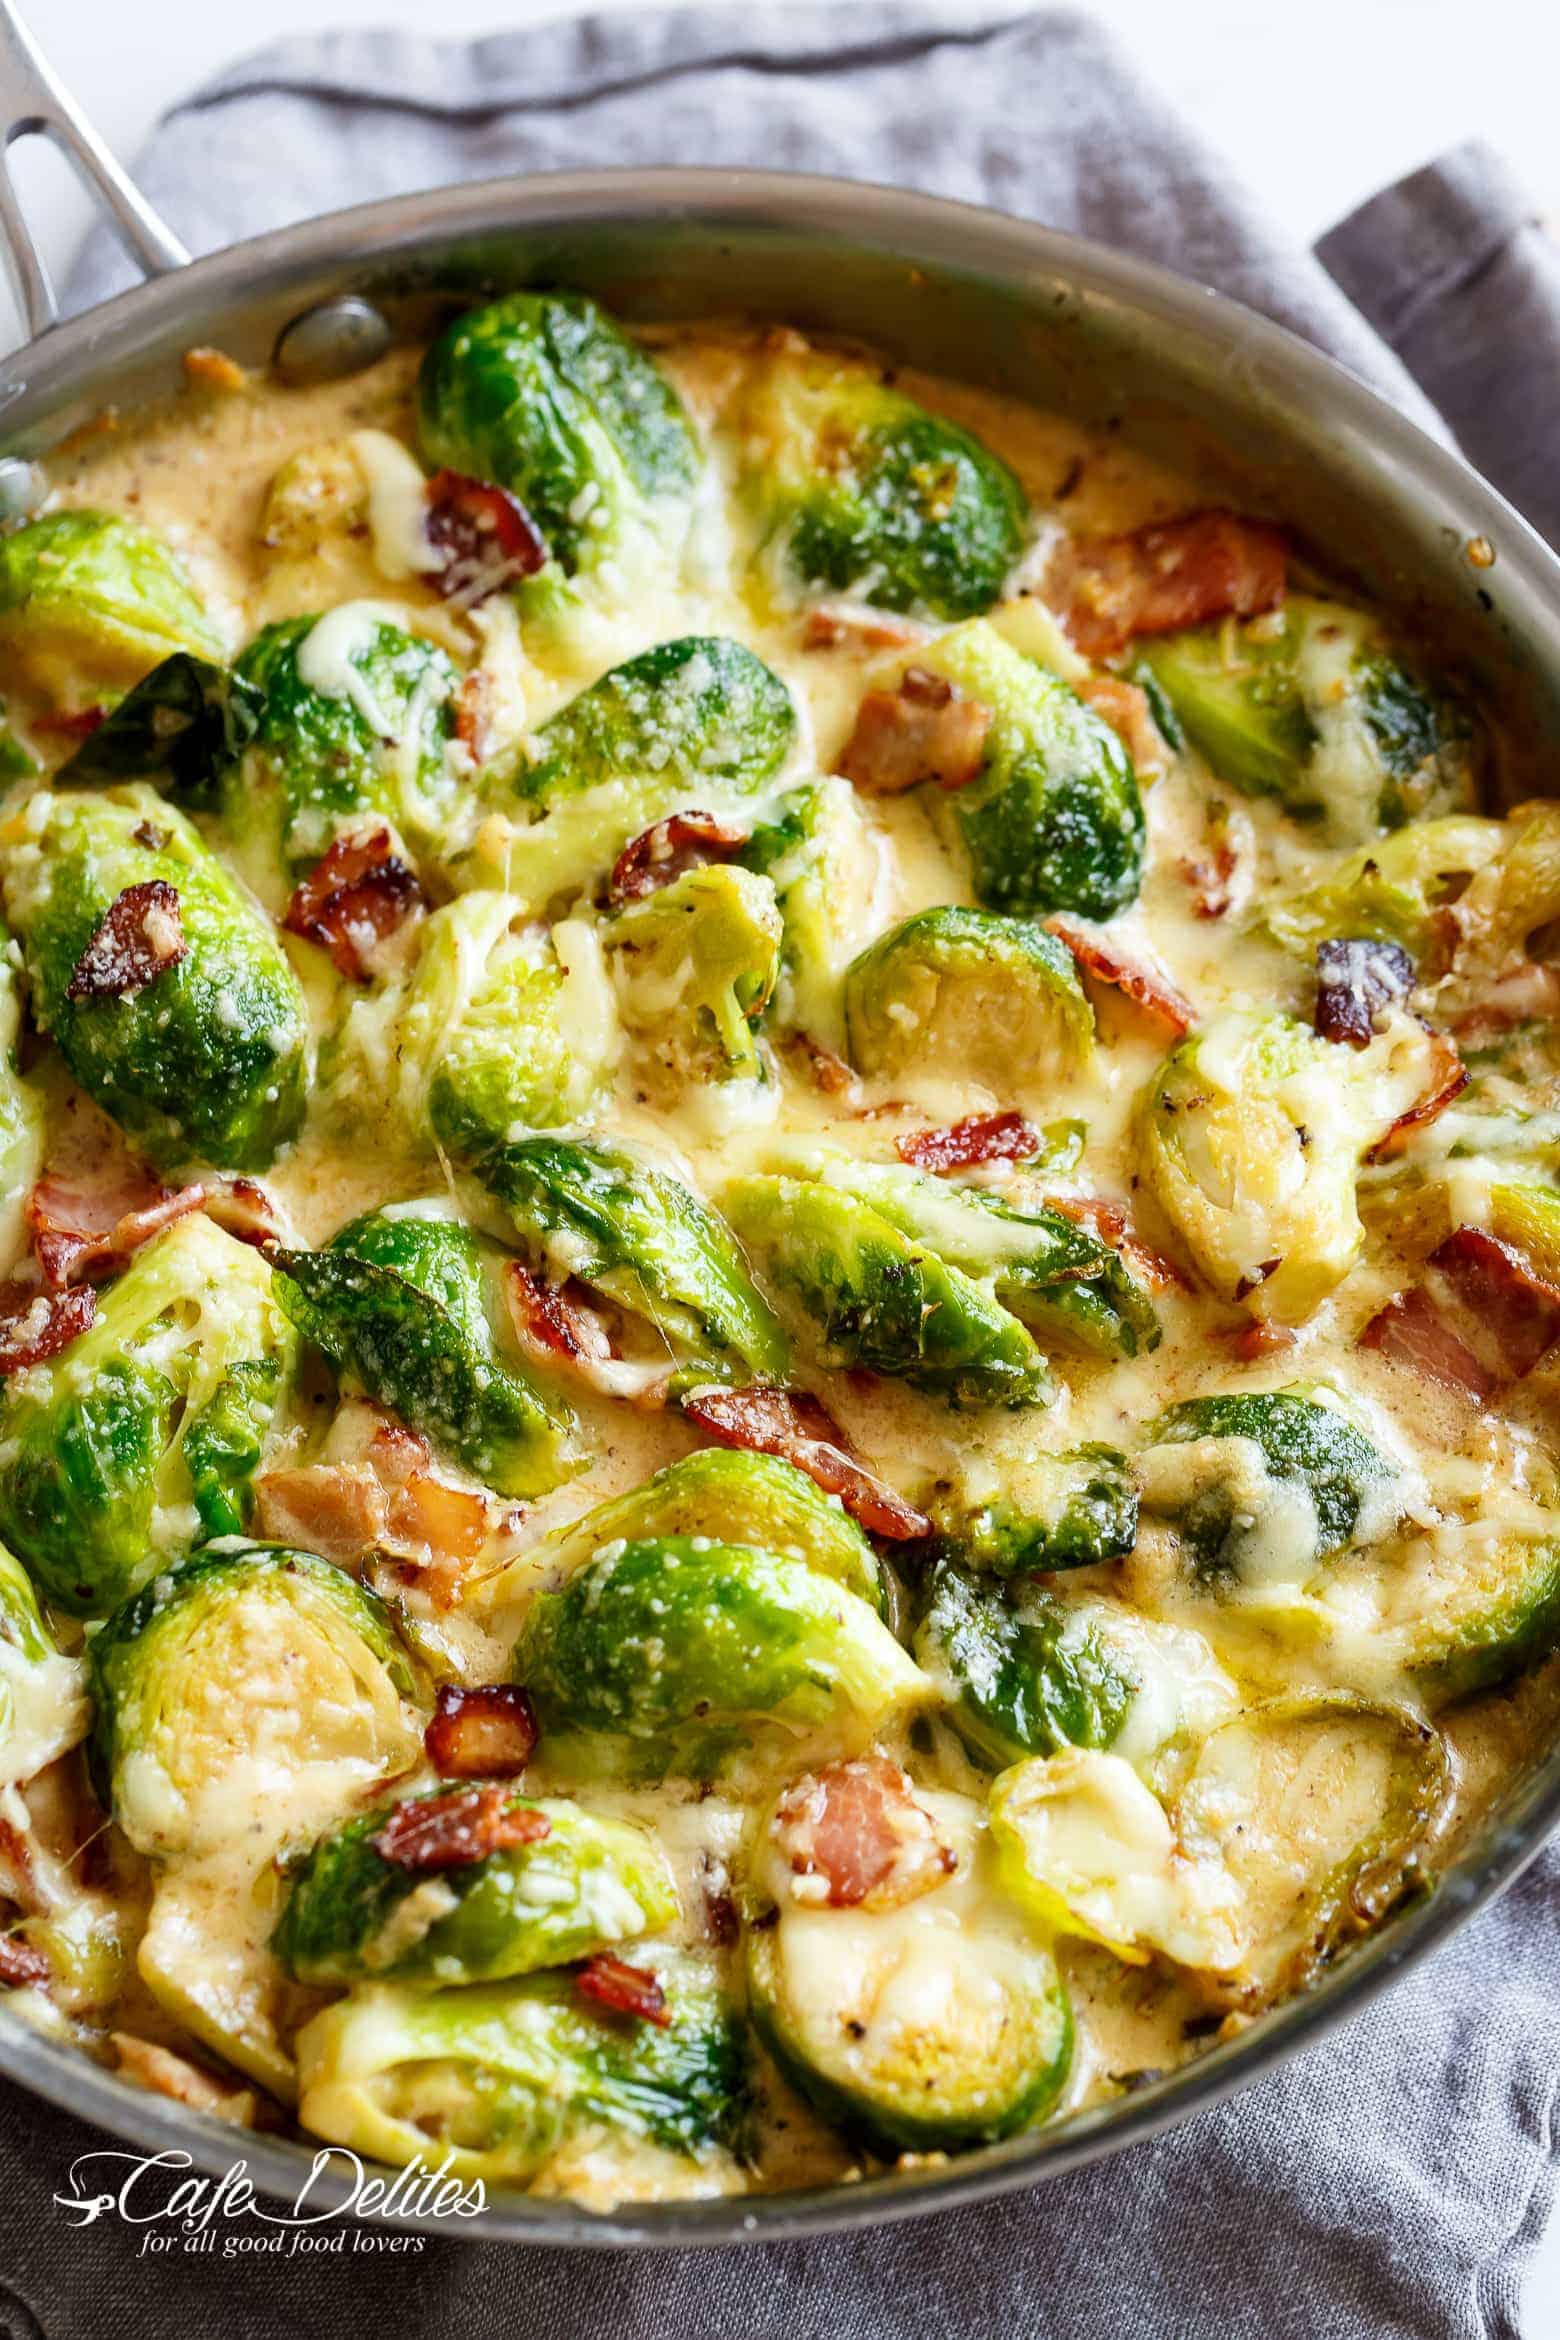 Cheesy-Garlic-Parmesan-Brussels-Sprouts-IMAGE-190.jpg